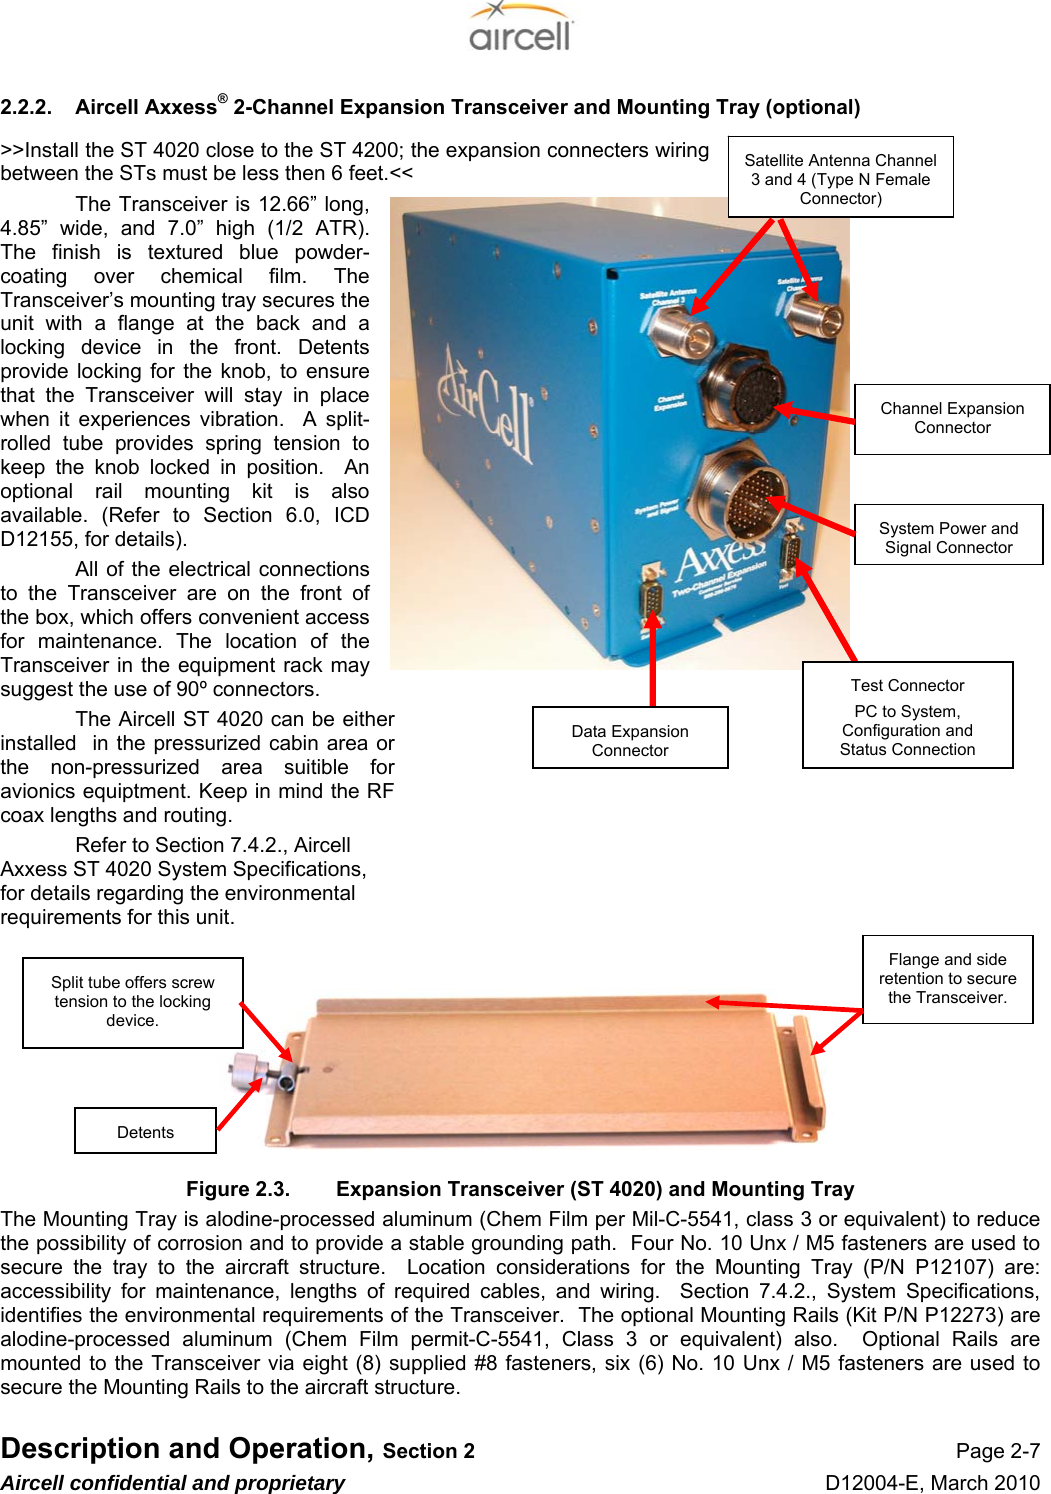  Description and Operation, Section 2 Page 2-7 Aircell confidential and proprietary D12004-E, March 2010 2.2.2.  Aircell Axxess® 2-Channel Expansion Transceiver and Mounting Tray (optional) &gt;&gt;Install the ST 4020 close to the ST 4200; the expansion connecters wiring between the STs must be less then 6 feet.&lt;&lt;    The Transceiver is 12.66” long, 4.85” wide, and 7.0” high (1/2 ATR). The finish is textured blue powder-coating over chemical film. The Transceiver’s mounting tray secures the unit with a flange at the back and a locking device in the front. Detents provide locking for the knob, to ensure that the Transceiver will stay in place when it experiences vibration.  A split- rolled tube provides spring tension to keep the knob locked in position.  An optional rail mounting kit is also available. (Refer to Section 6.0, ICD D12155, for details). All of the electrical connections to the Transceiver are on the front of the box, which offers convenient access for maintenance. The location of the Transceiver in the equipment rack may suggest the use of 90º connectors. The Aircell ST 4020 can be either installed  in the pressurized cabin area or the non-pressurized area suitible for avionics equiptment. Keep in mind the RF coax lengths and routing. Refer to Section 7.4.2., Aircell Axxess ST 4020 System Specifications, for details regarding the environmental requirements for this unit.         Figure 2.3.  Expansion Transceiver (ST 4020) and Mounting Tray The Mounting Tray is alodine-processed aluminum (Chem Film per Mil-C-5541, class 3 or equivalent) to reduce the possibility of corrosion and to provide a stable grounding path.  Four No. 10 Unx / M5 fasteners are used to secure the tray to the aircraft structure.  Location considerations for the Mounting Tray (P/N P12107) are: accessibility for maintenance, lengths of required cables, and wiring.  Section 7.4.2., System Specifications, identifies the environmental requirements of the Transceiver.  The optional Mounting Rails (Kit P/N P12273) are alodine-processed aluminum (Chem Film permit-C-5541, Class 3 or equivalent) also.  Optional Rails are mounted to the Transceiver via eight (8) supplied #8 fasteners, six (6) No. 10 Unx / M5 fasteners are used to secure the Mounting Rails to the aircraft structure. Flange and side retention to secure the Transceiver. Split tube offers screw tension to the locking device. Detents System Power and Signal Connector Satellite Antenna Channel 3 and 4 (Type N Female Connector) Channel Expansion Connector Data Expansion ConnectorTest Connector PC to System, Configuration and Status Connection 